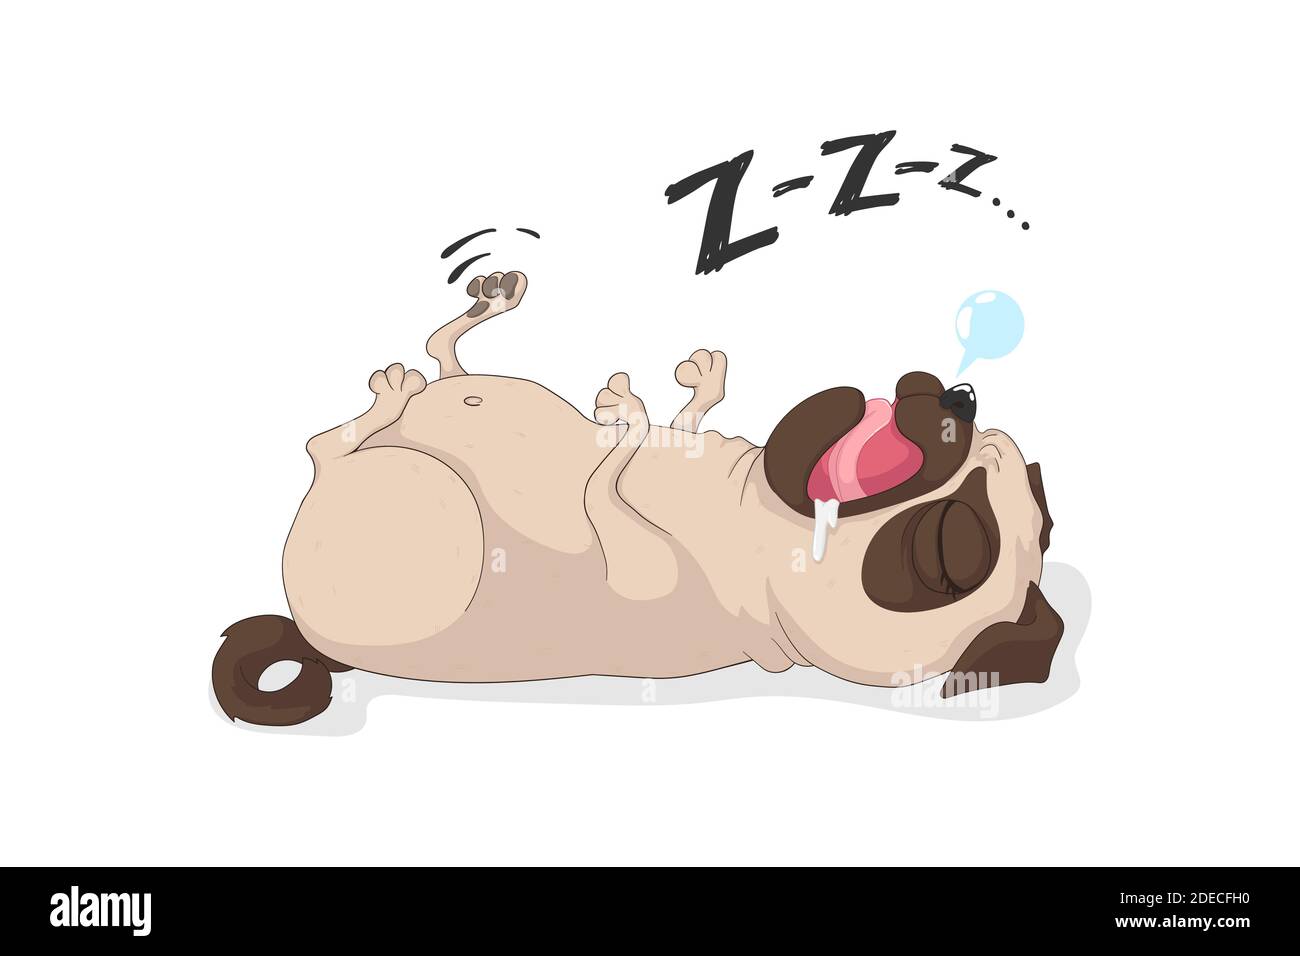 Cute sleeping pug dog with text. Vector hand drawn cartoon illustration. For t-shirt design, posters, cards and prints. Stock Vector